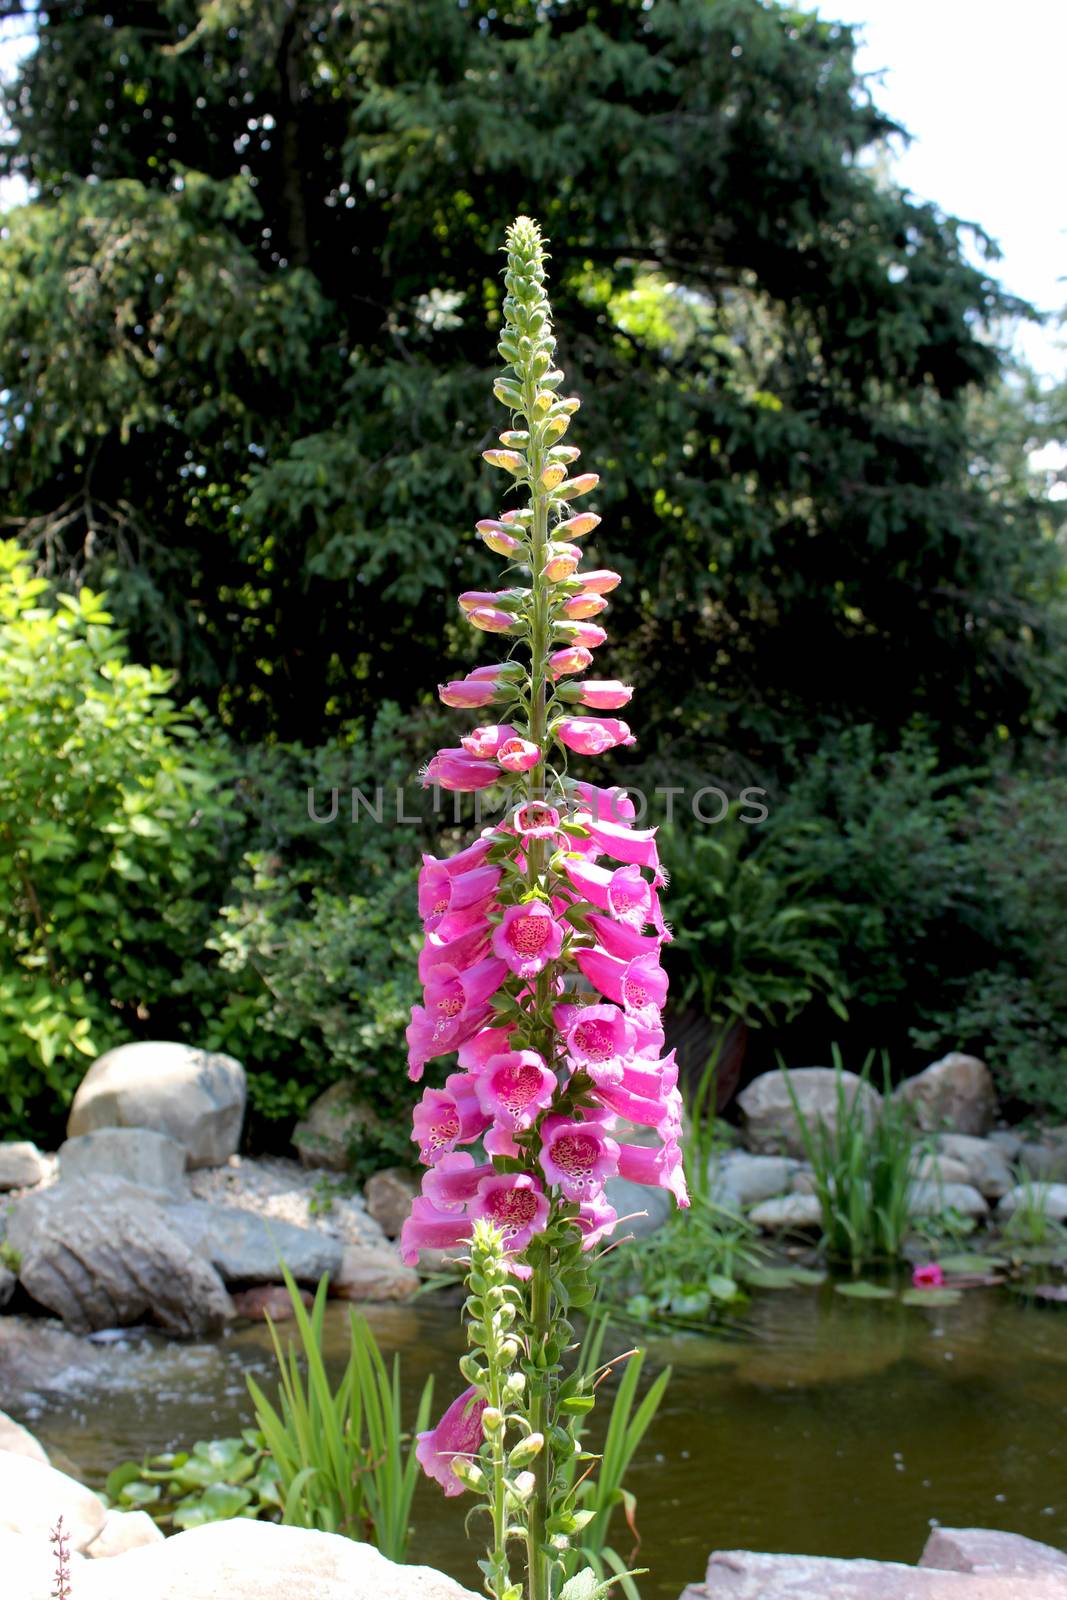 Digitalis is a genus of about 20 species of herbaceous perennials, shrubs, and biennials commonly called foxgloves. This genus is native to western and southwestern Europe, western and central Asia, Australasia and northwestern Africa.